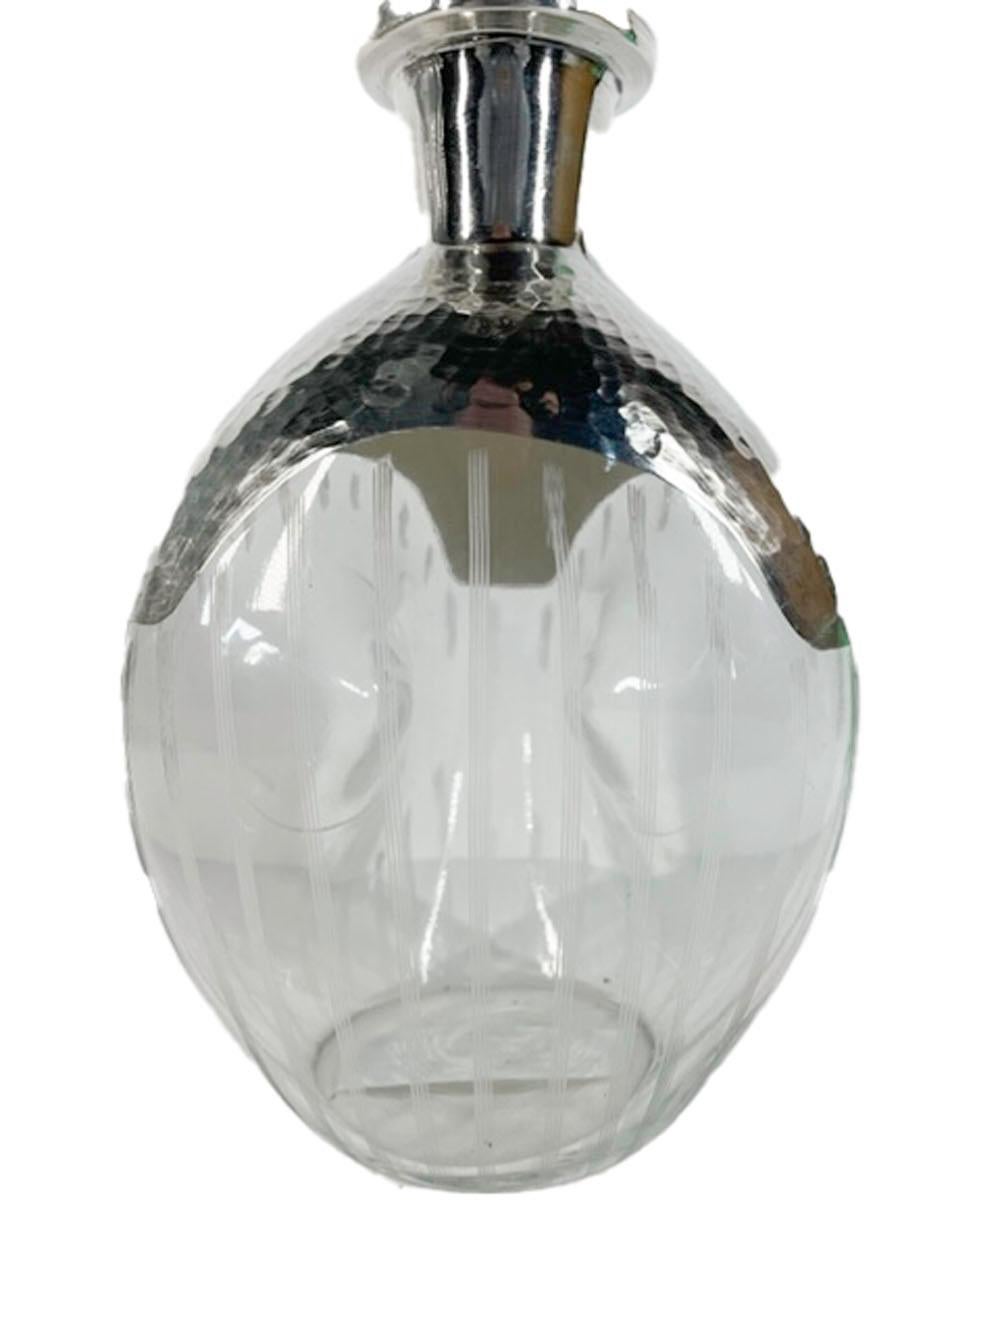 Art Deco three-sided pinch decanter with 2 sides having a large central dimple, the shoulder and top of the mushroom stopper with an overlay of hammered silver and the three sides with vertical etched lines.